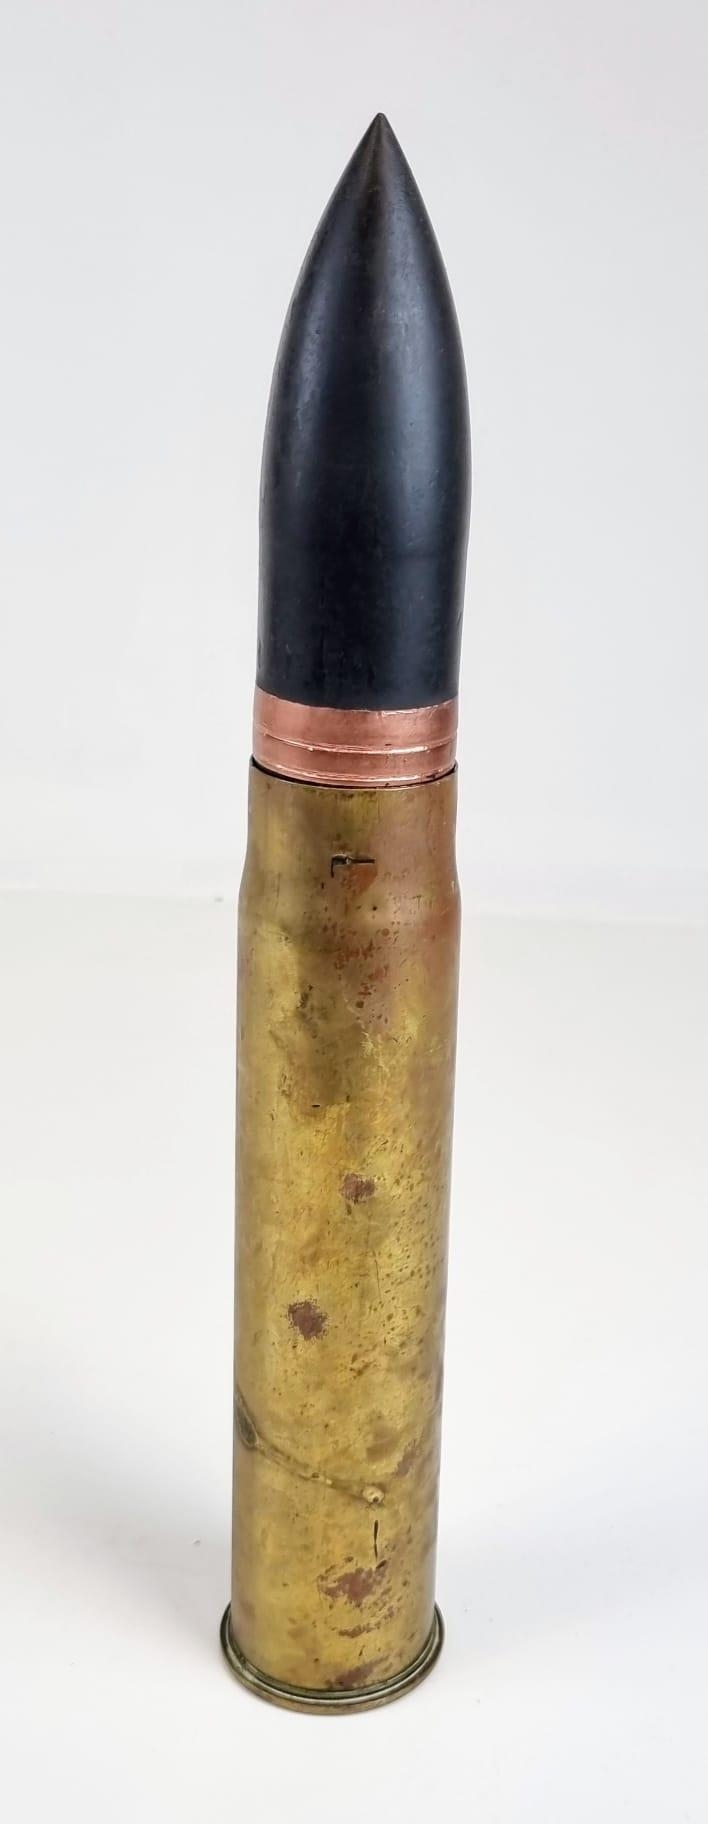 WW1 British MK1 Tank 6 Pounder Shell Case Dated 1916 (Battle of the Somme).